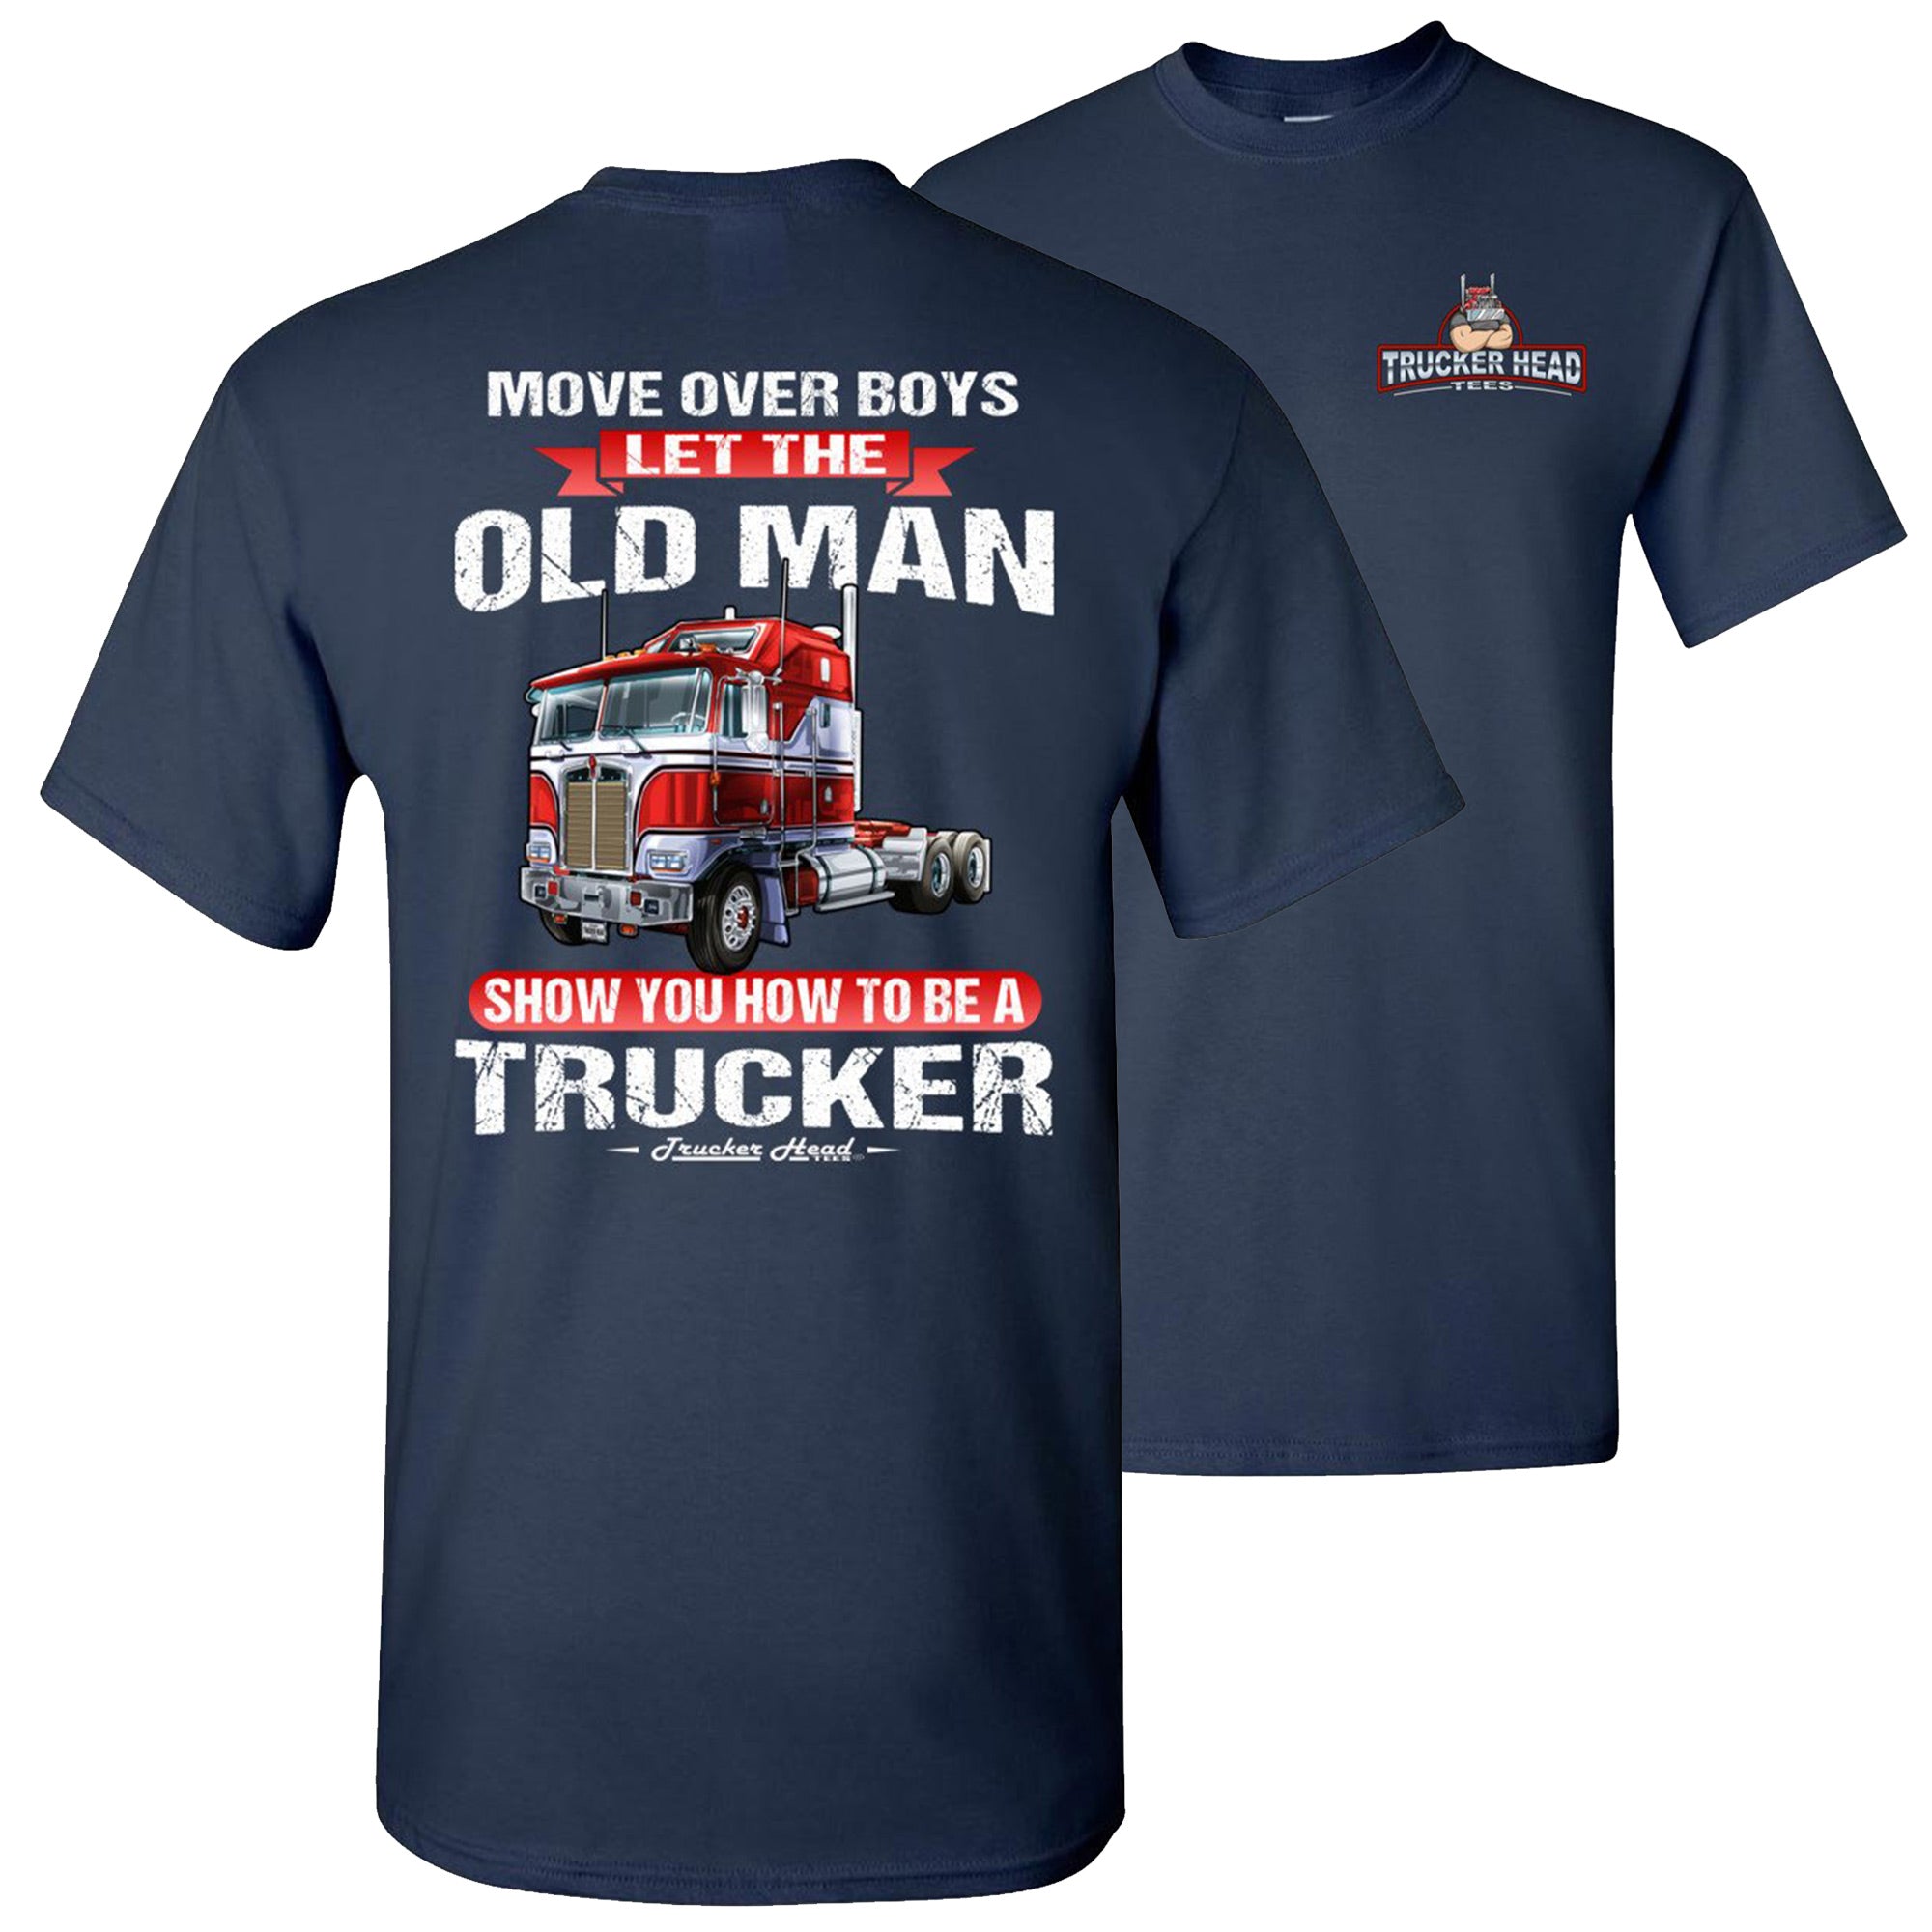 https://thatsacooltee.com/cdn/shop/products/move-over-boys-let-the-old-man-show-you-how-to-be-a-trucker-navy_1024x1024@2x.jpg?v=1604361746